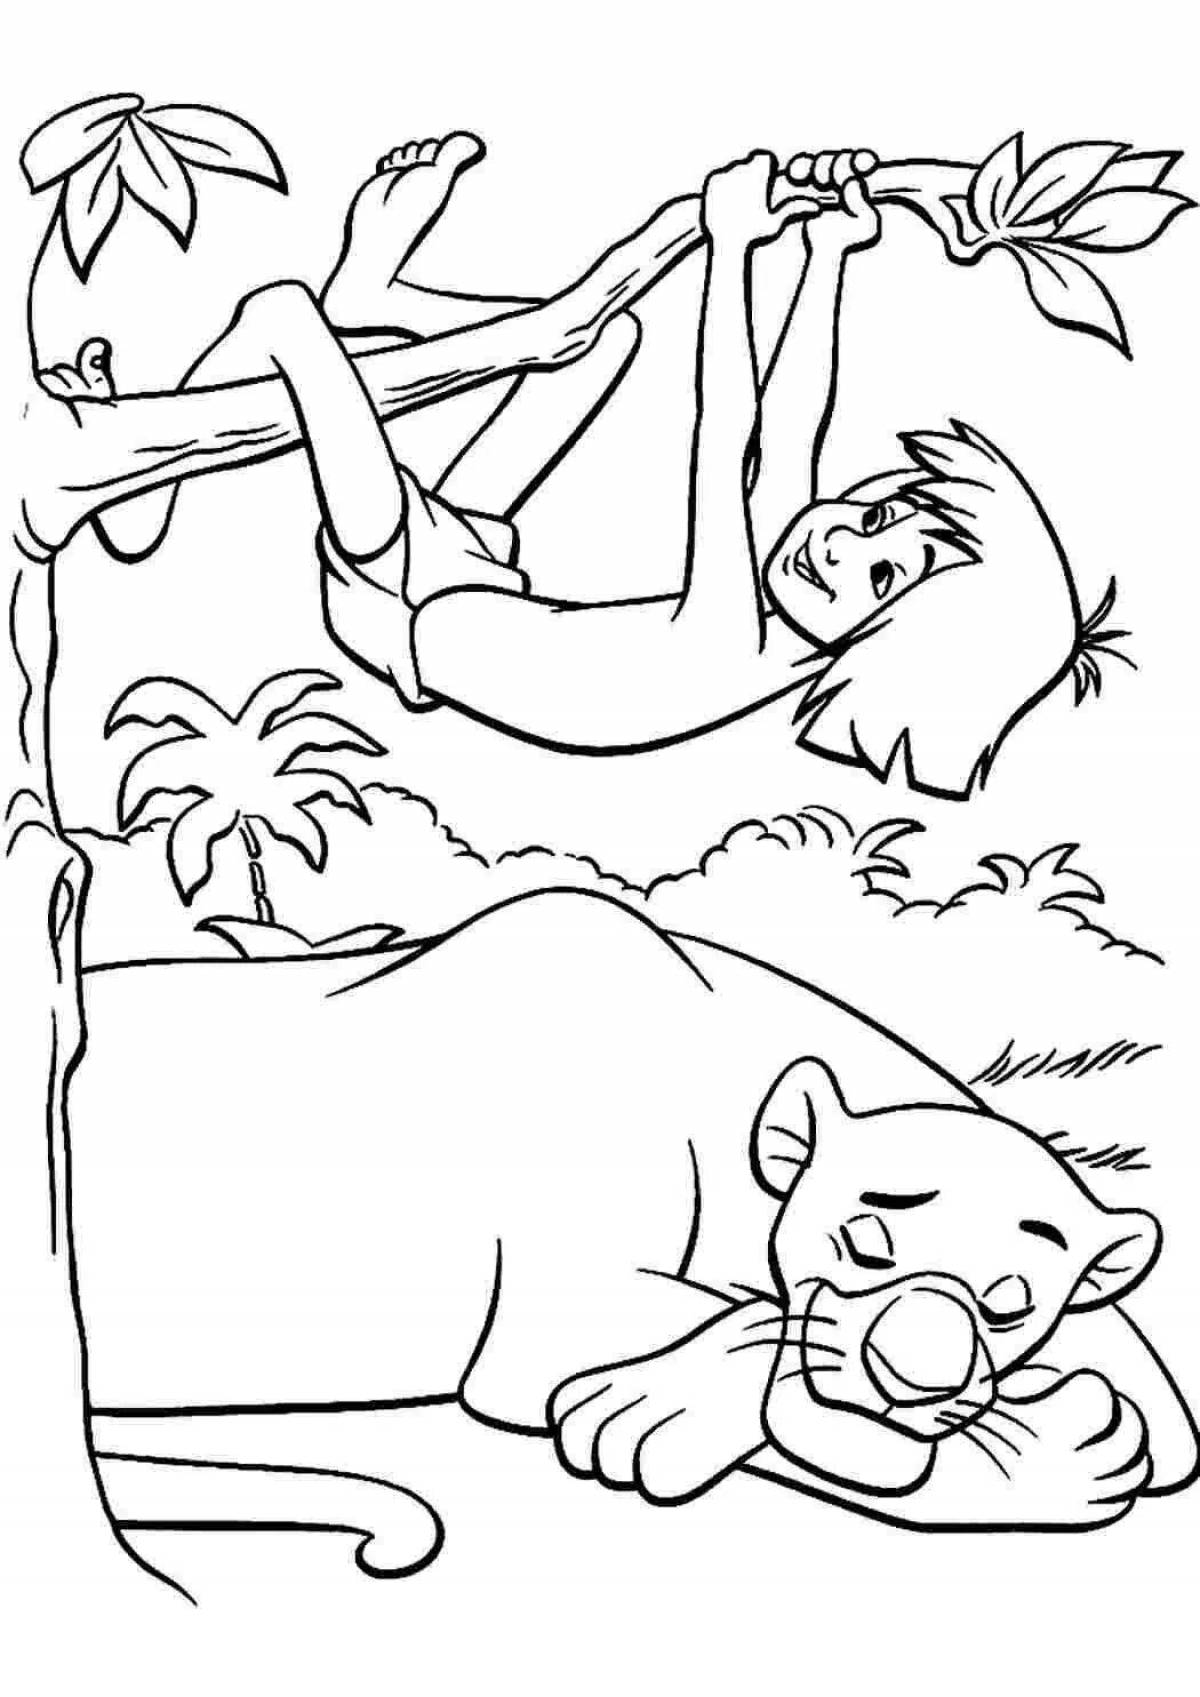 Mowgli and Bagheera coloring pages